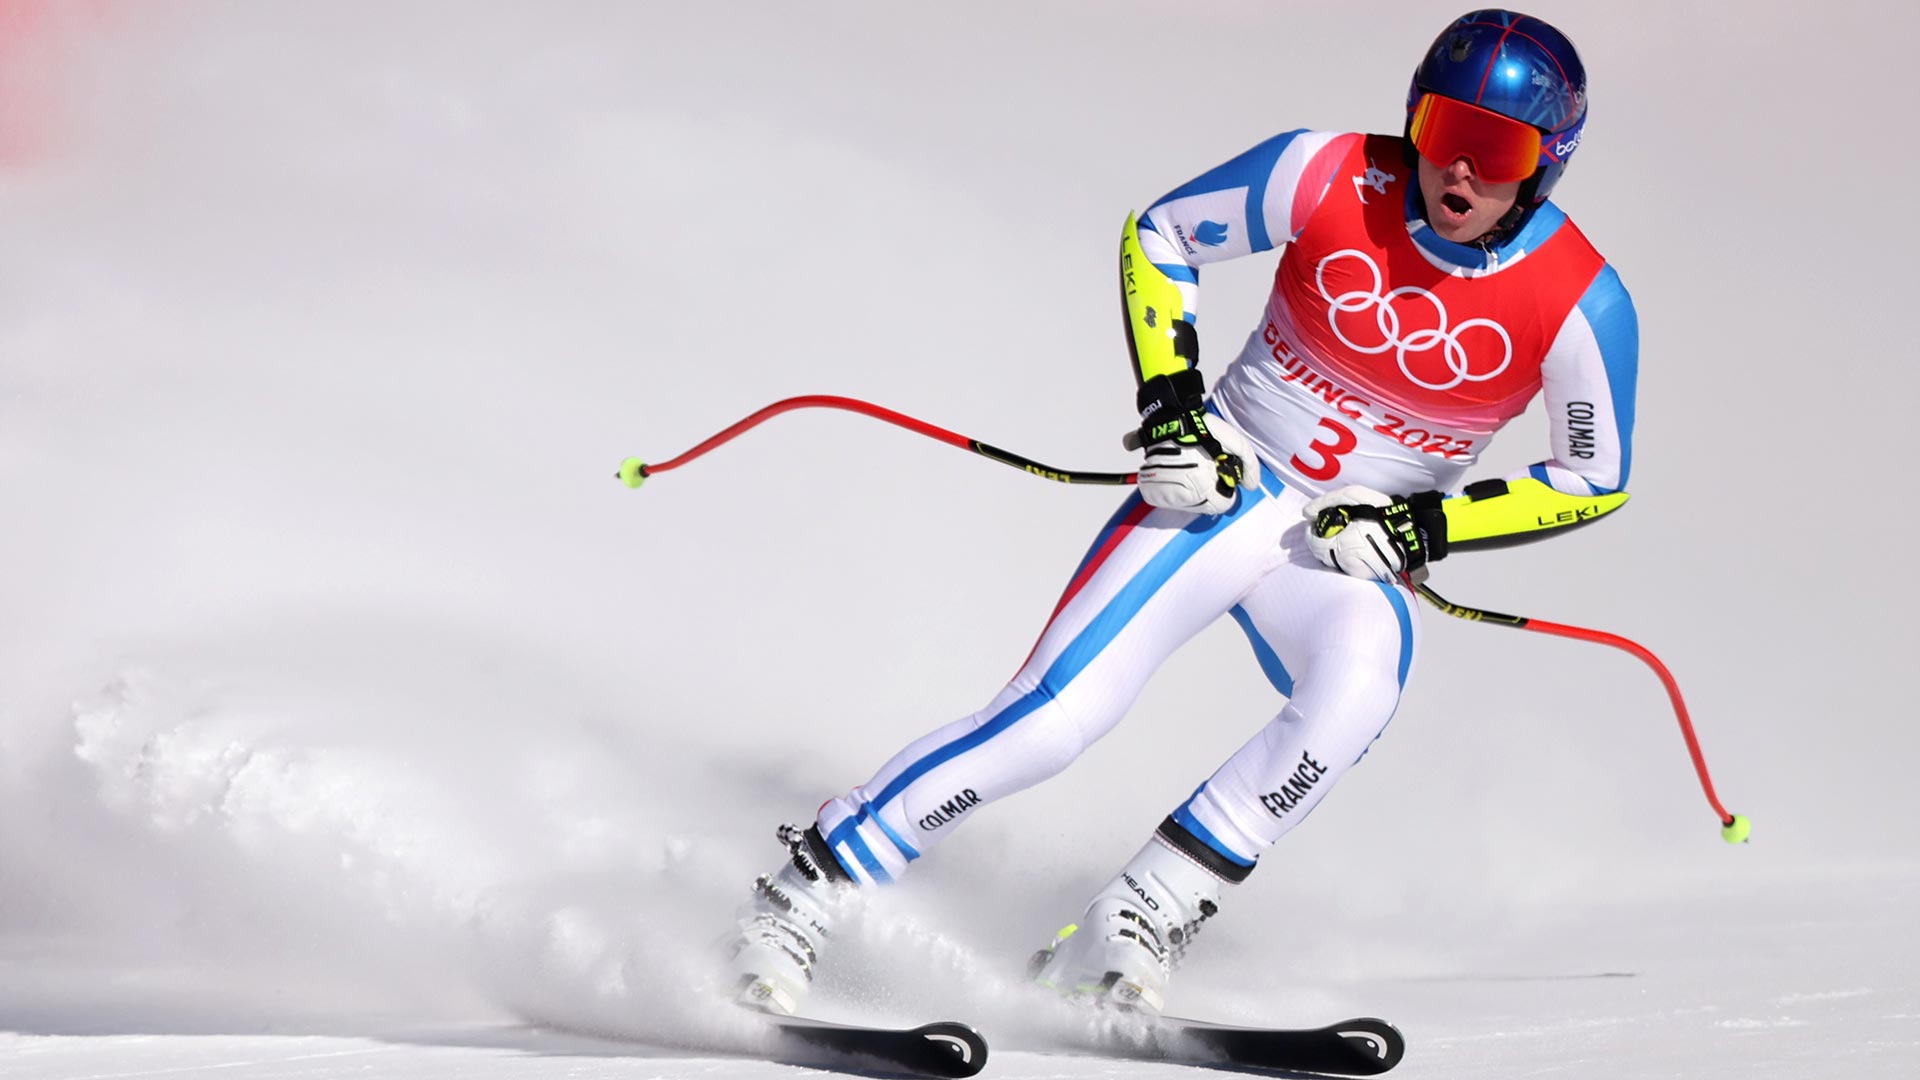 How to watch the Alpine skiing mens combined at the 2022 Winter Olympics